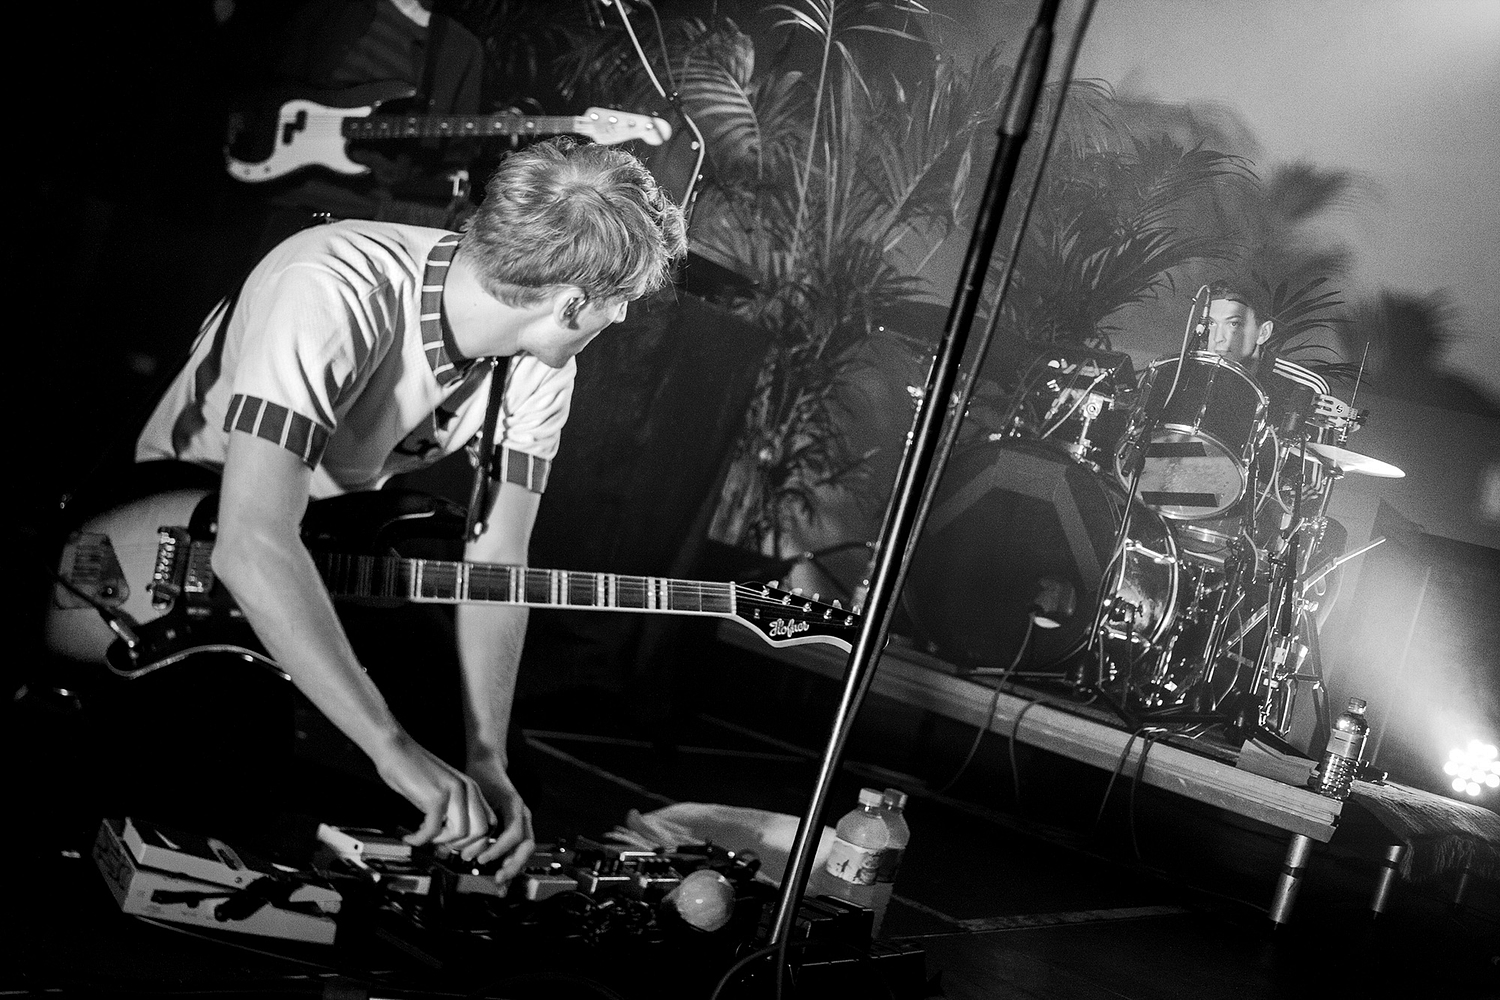 Palm trees, naked fans and sold out shows: Glass Animals’ peanut butter tribe